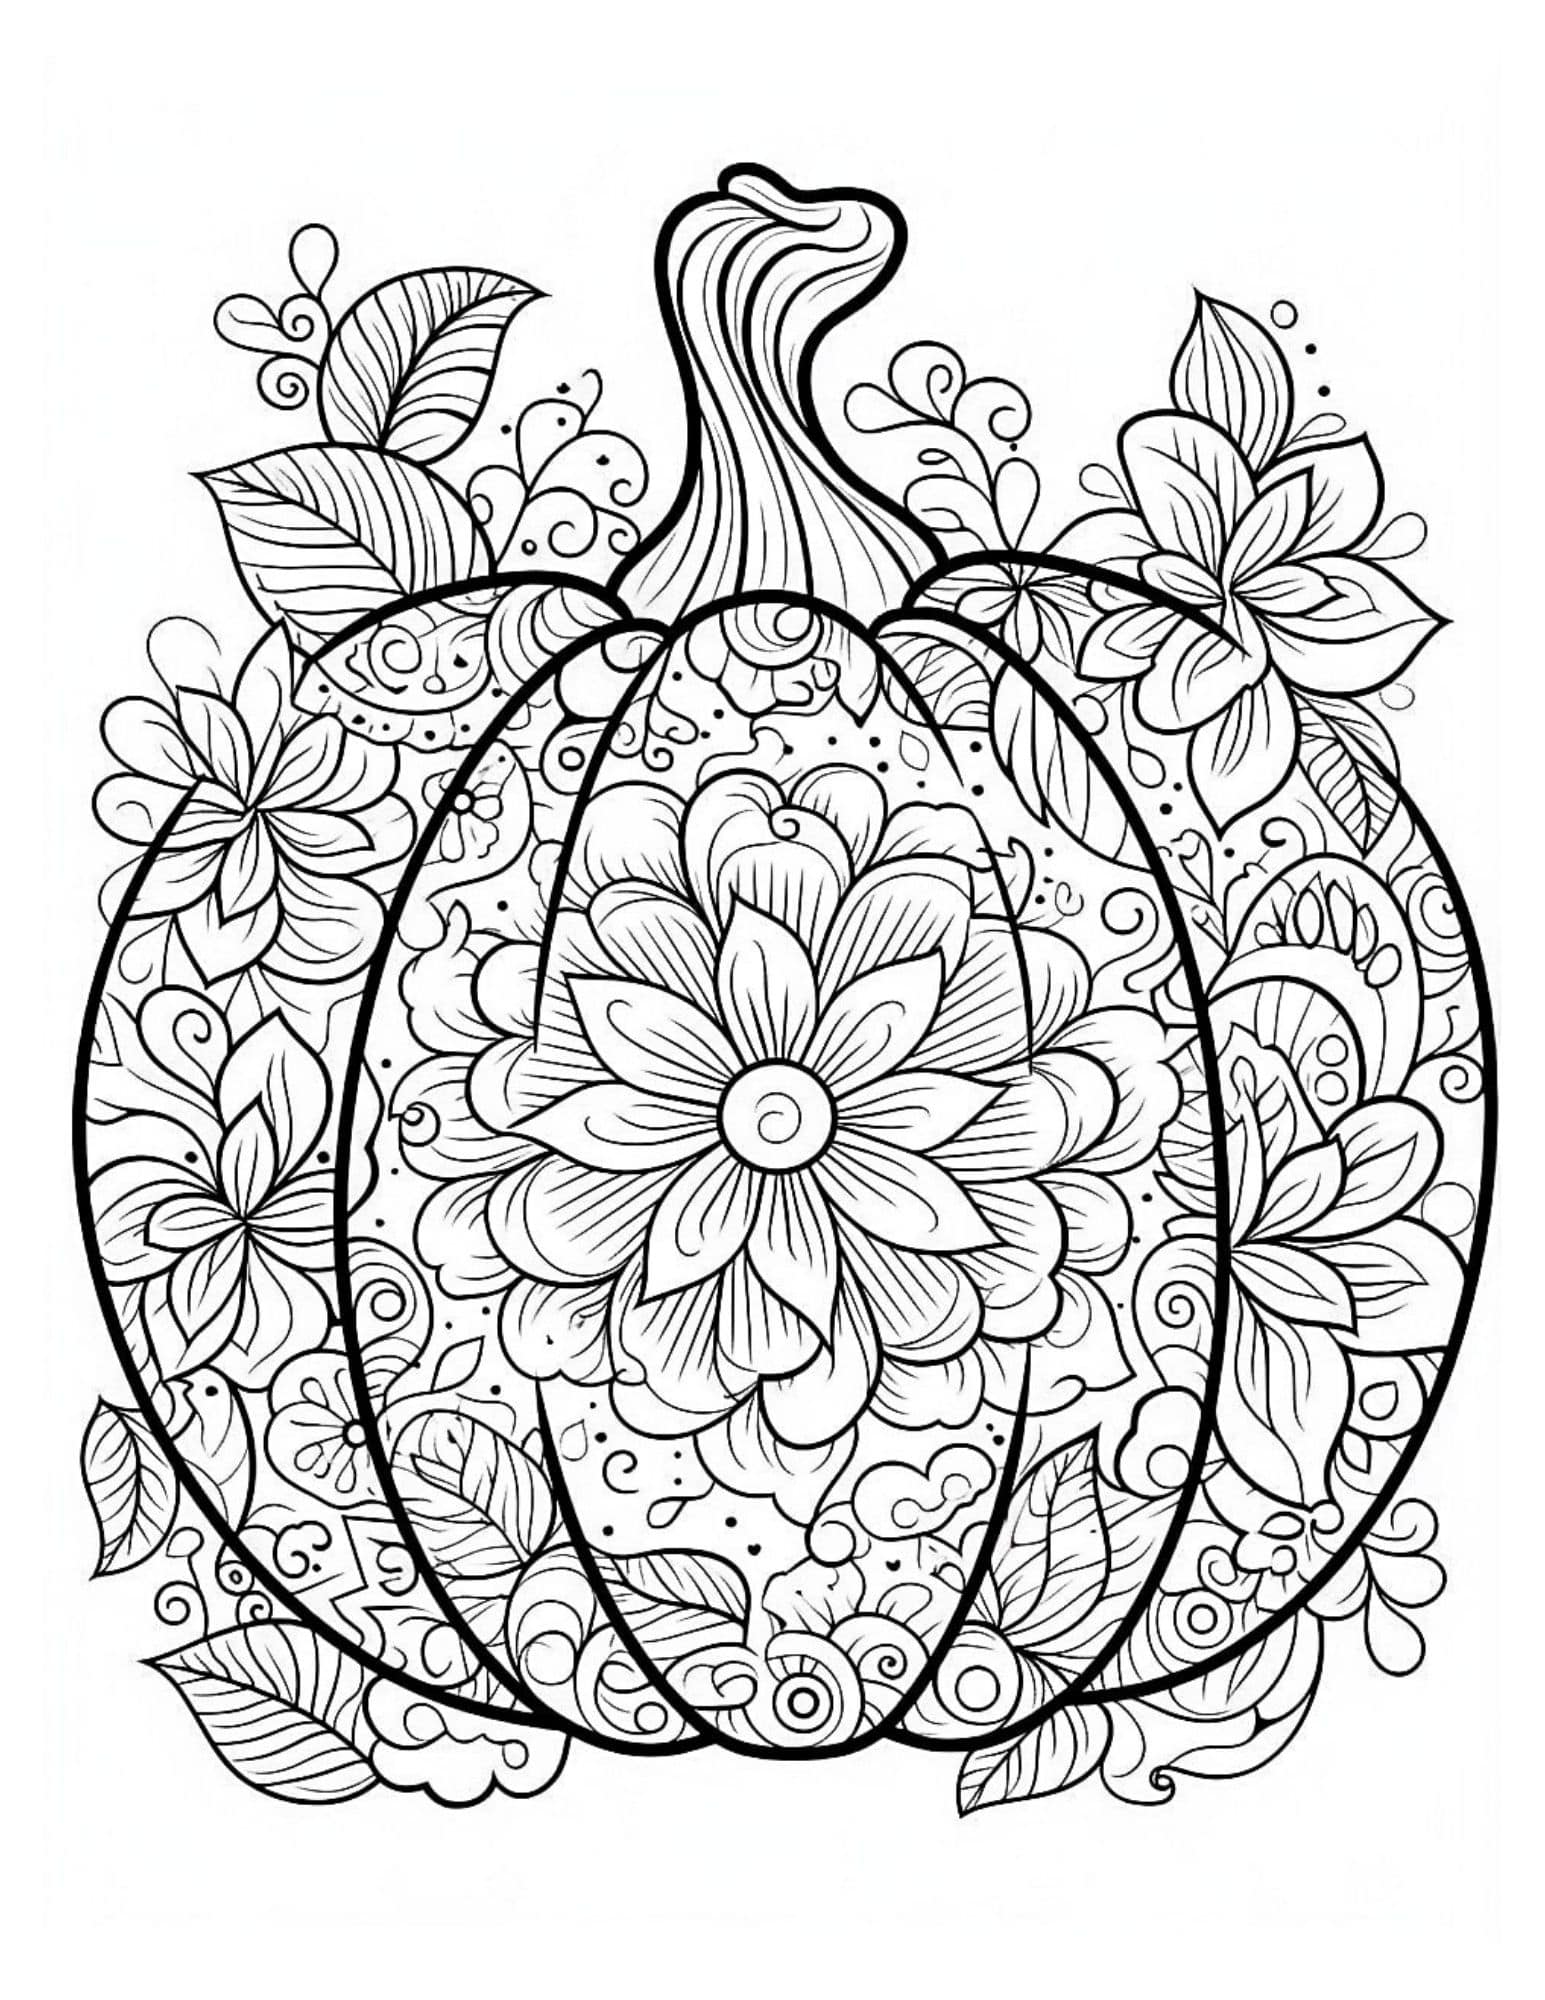 Thanksgiving coloring pages for kids and adults